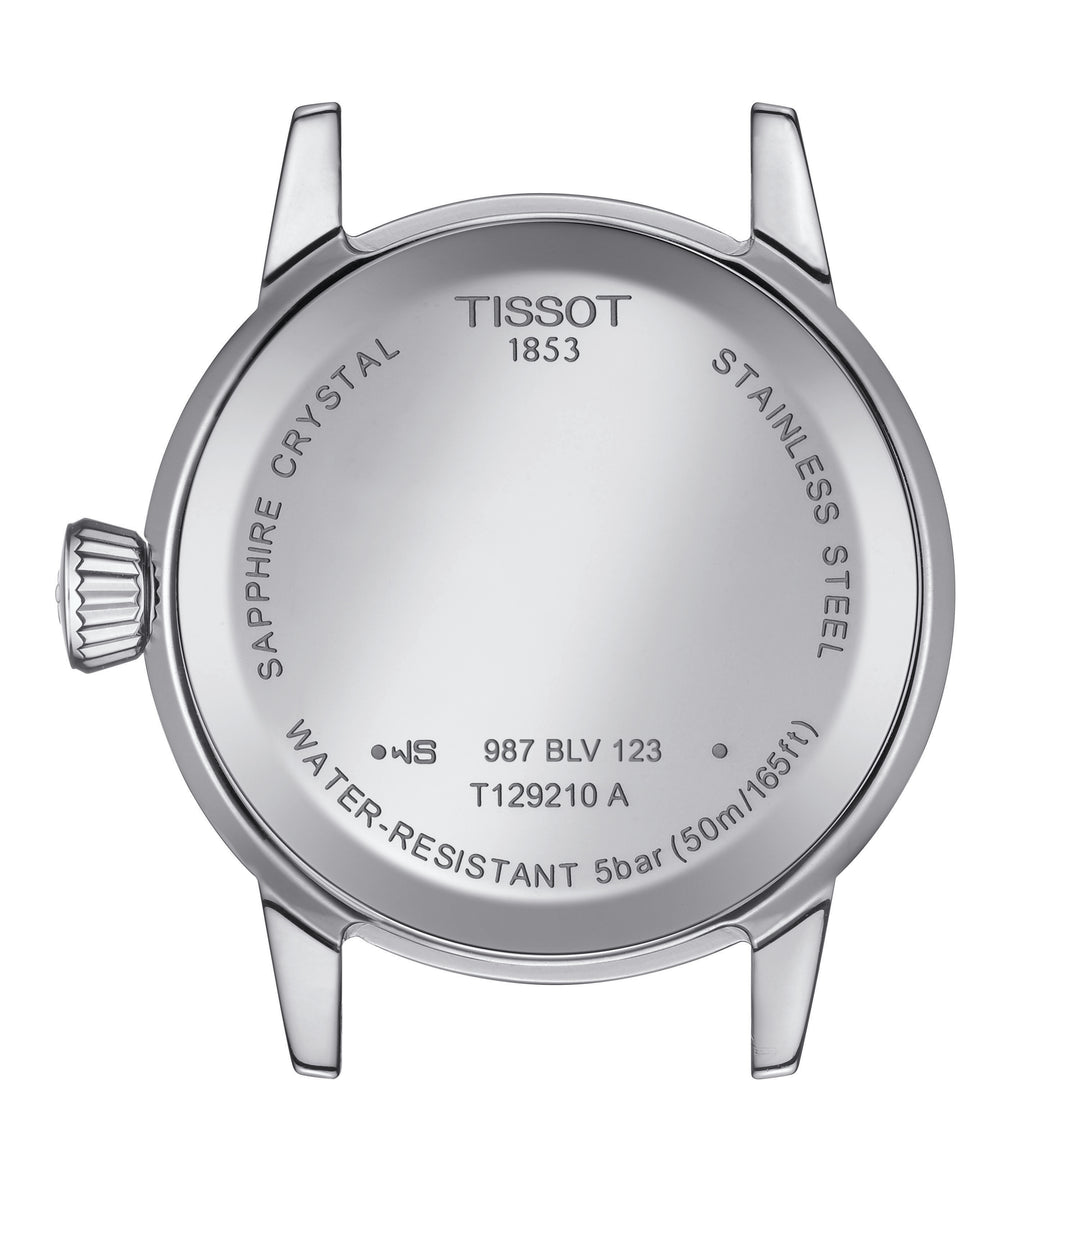 The Tissot Classic Dream is a